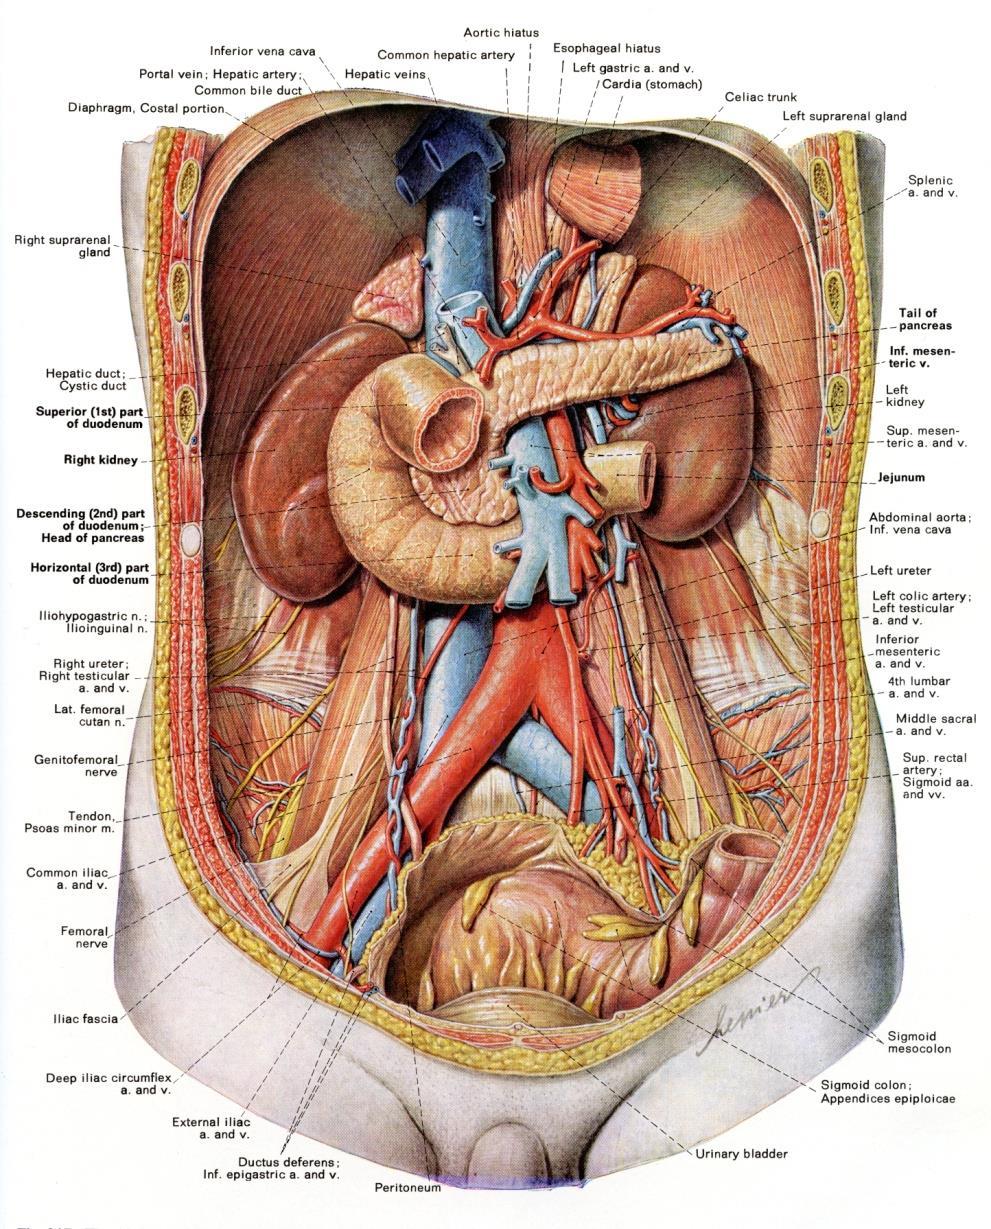 Neurochemical Communication The adrenal medulla (the center of the suprarenal gland, which sits above the kidneys) receives direct preganglionic sympathetic innervation.